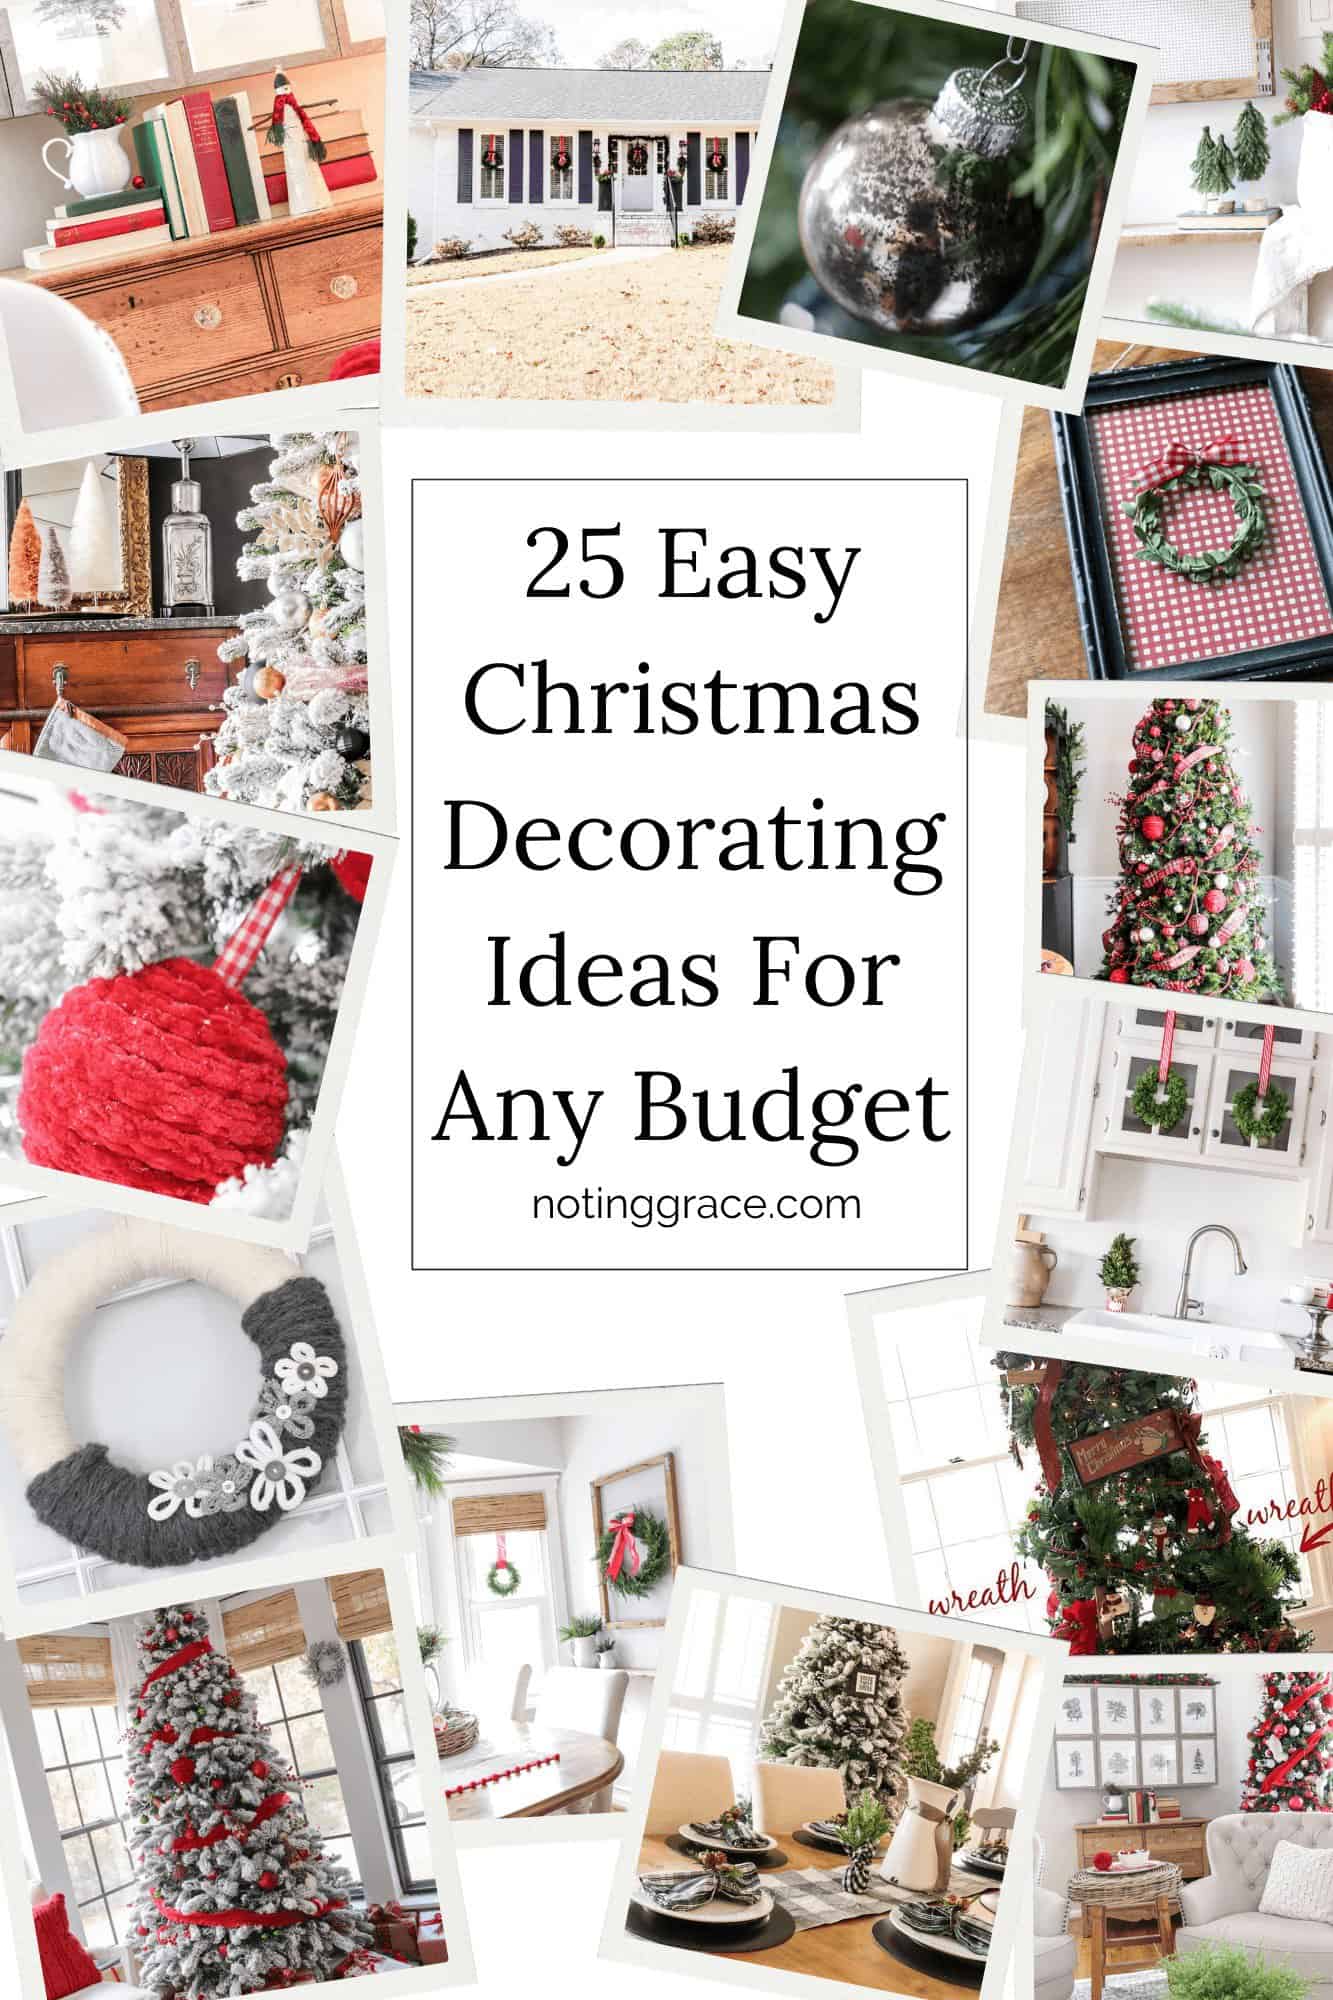 25 Easy Christmas Decorating Ideas for any Budget